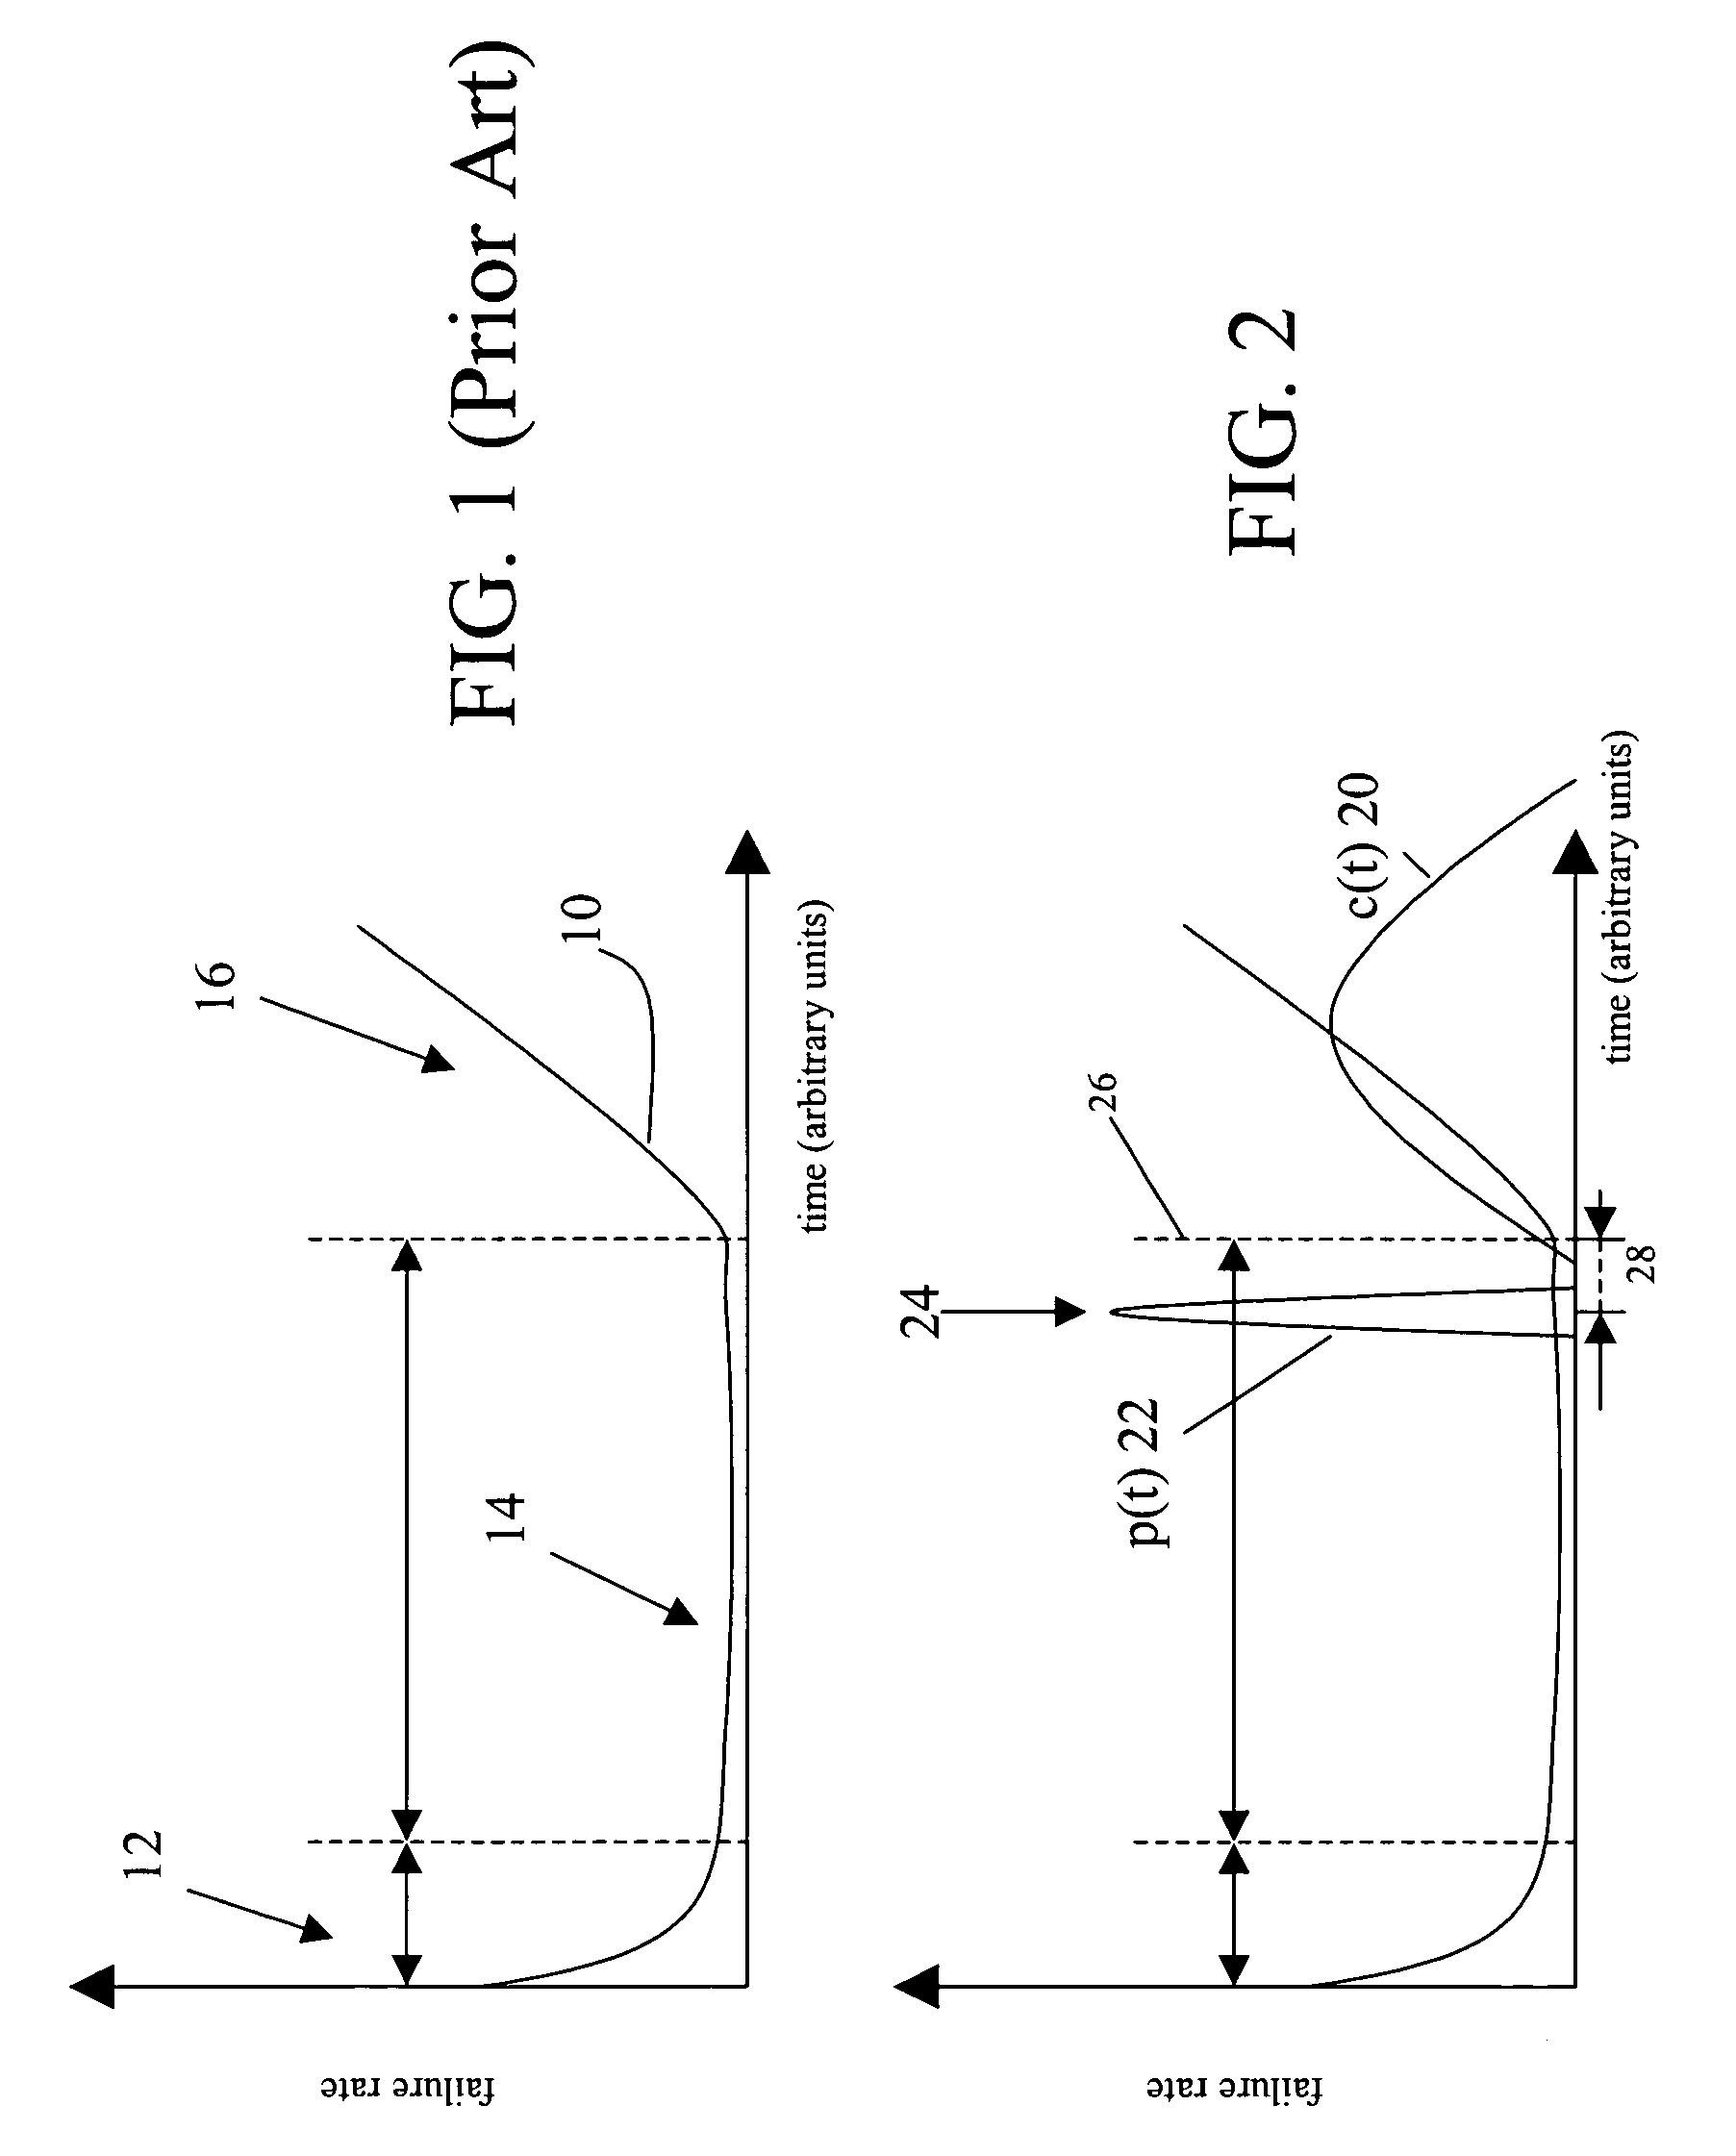 Prognostic cell for predicting failure of integrated circuits